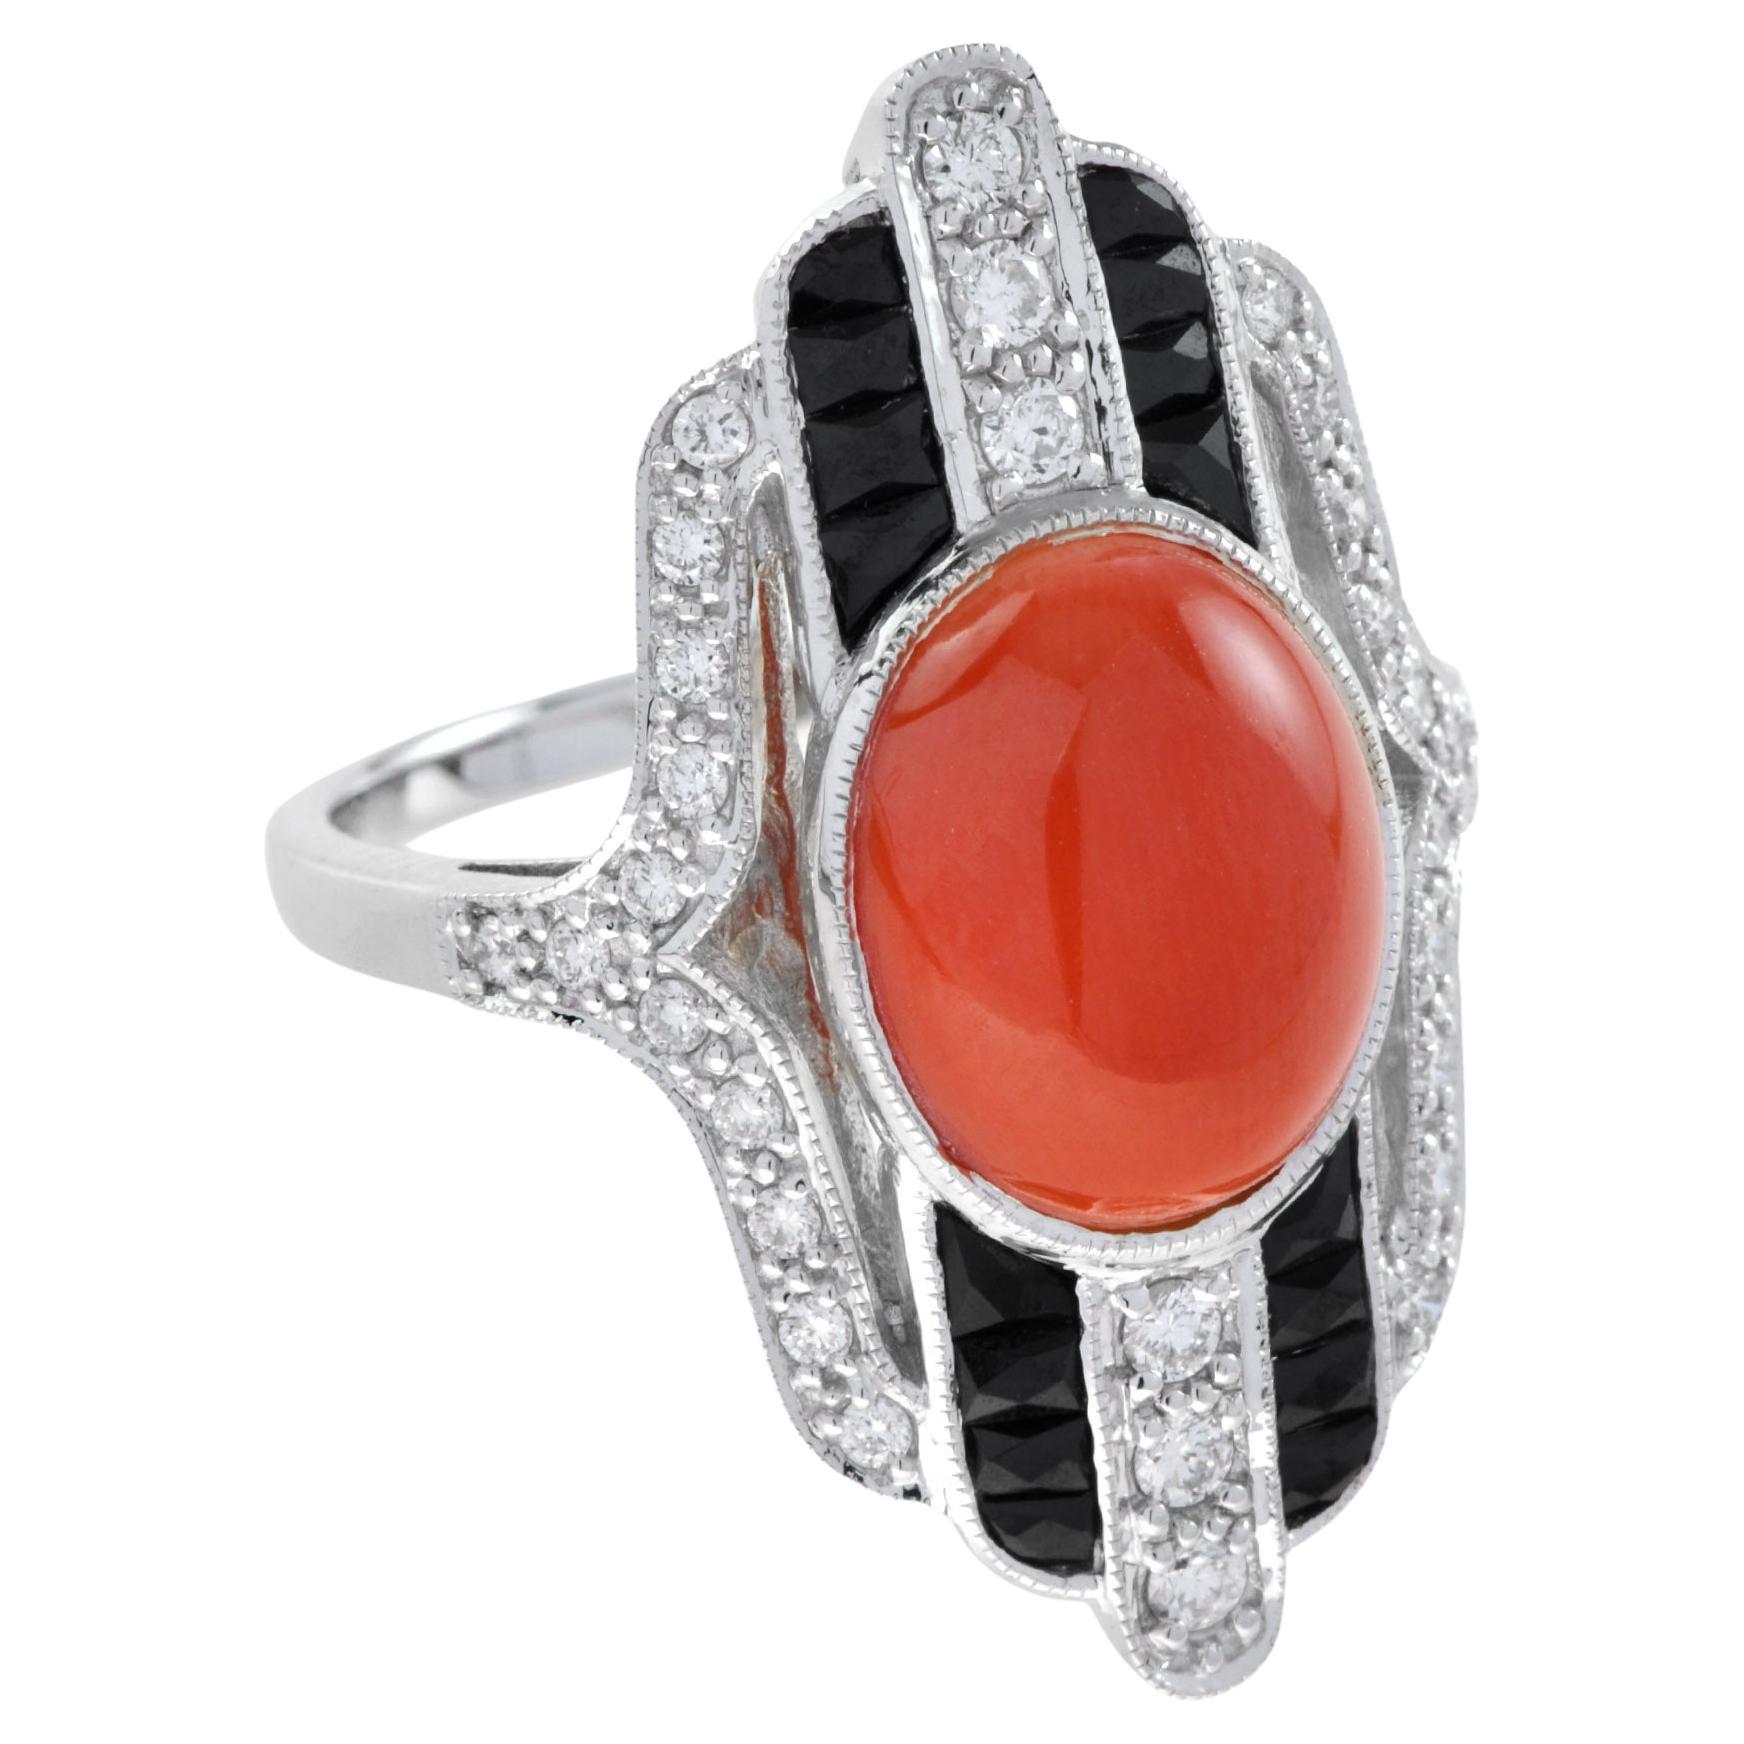 Art Deco Style Cabochon Coral with Diamond and Onyx Cocktail Ring in 14K Gold